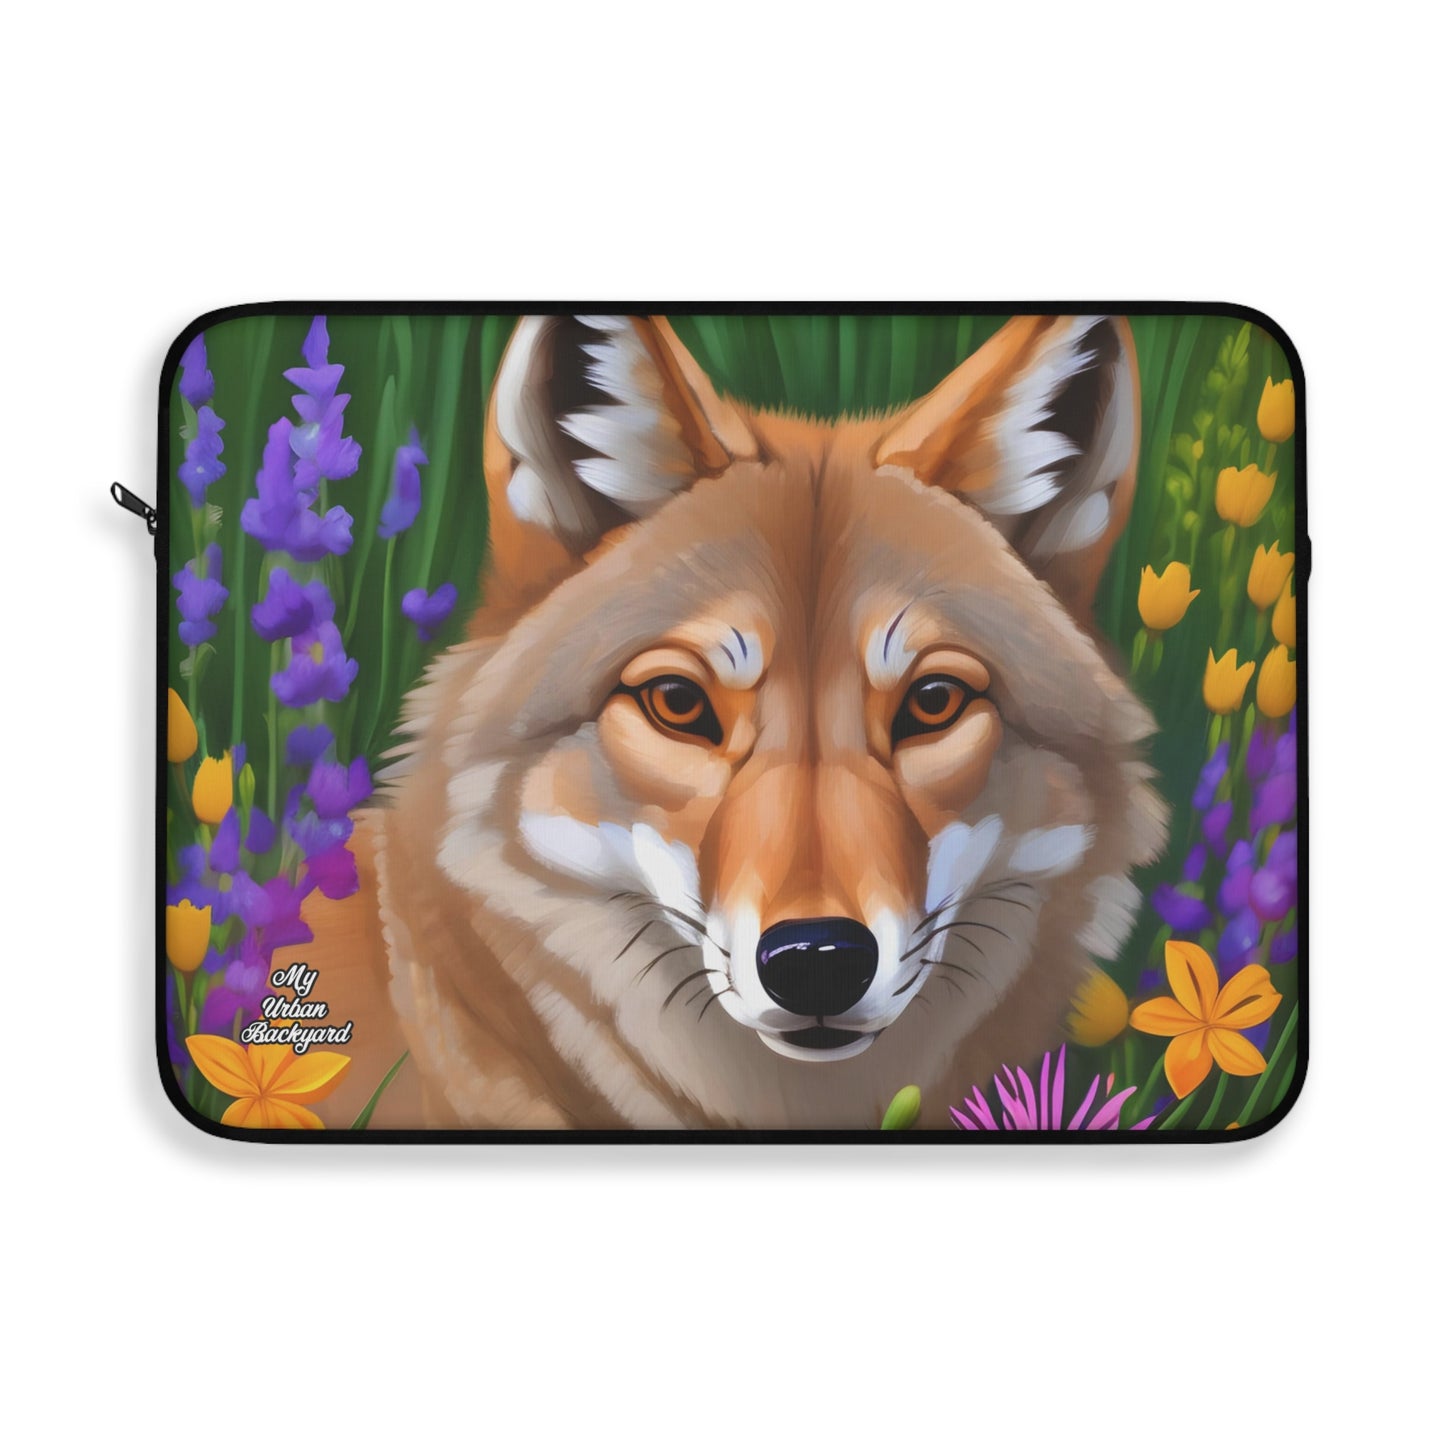 Coyote with Flowers, Laptop Carrying Case, Top Loading Sleeve for School or Work